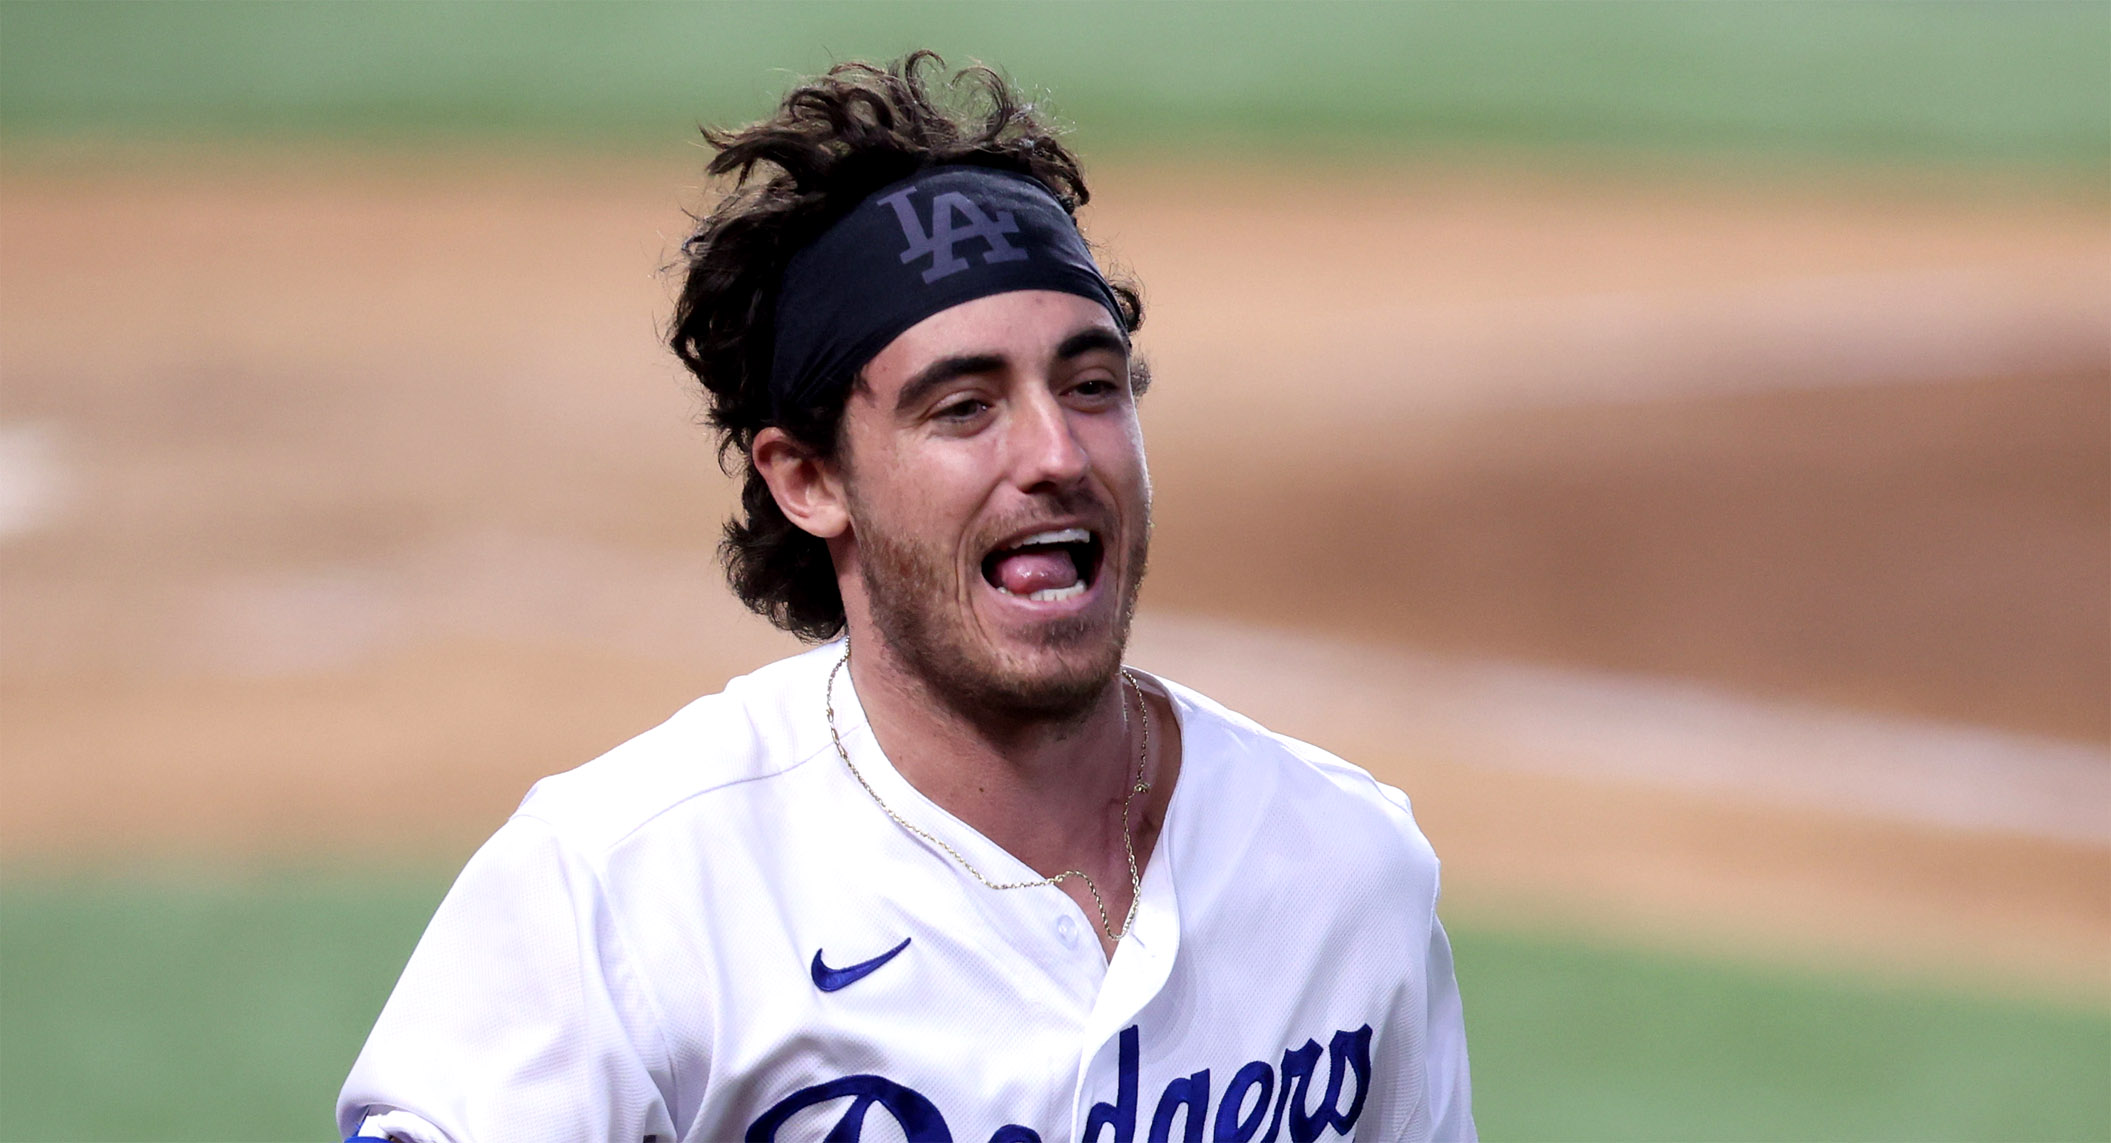 Jimmy Kimmel Asks Cody Bellinger If People Say He Looks 'High All